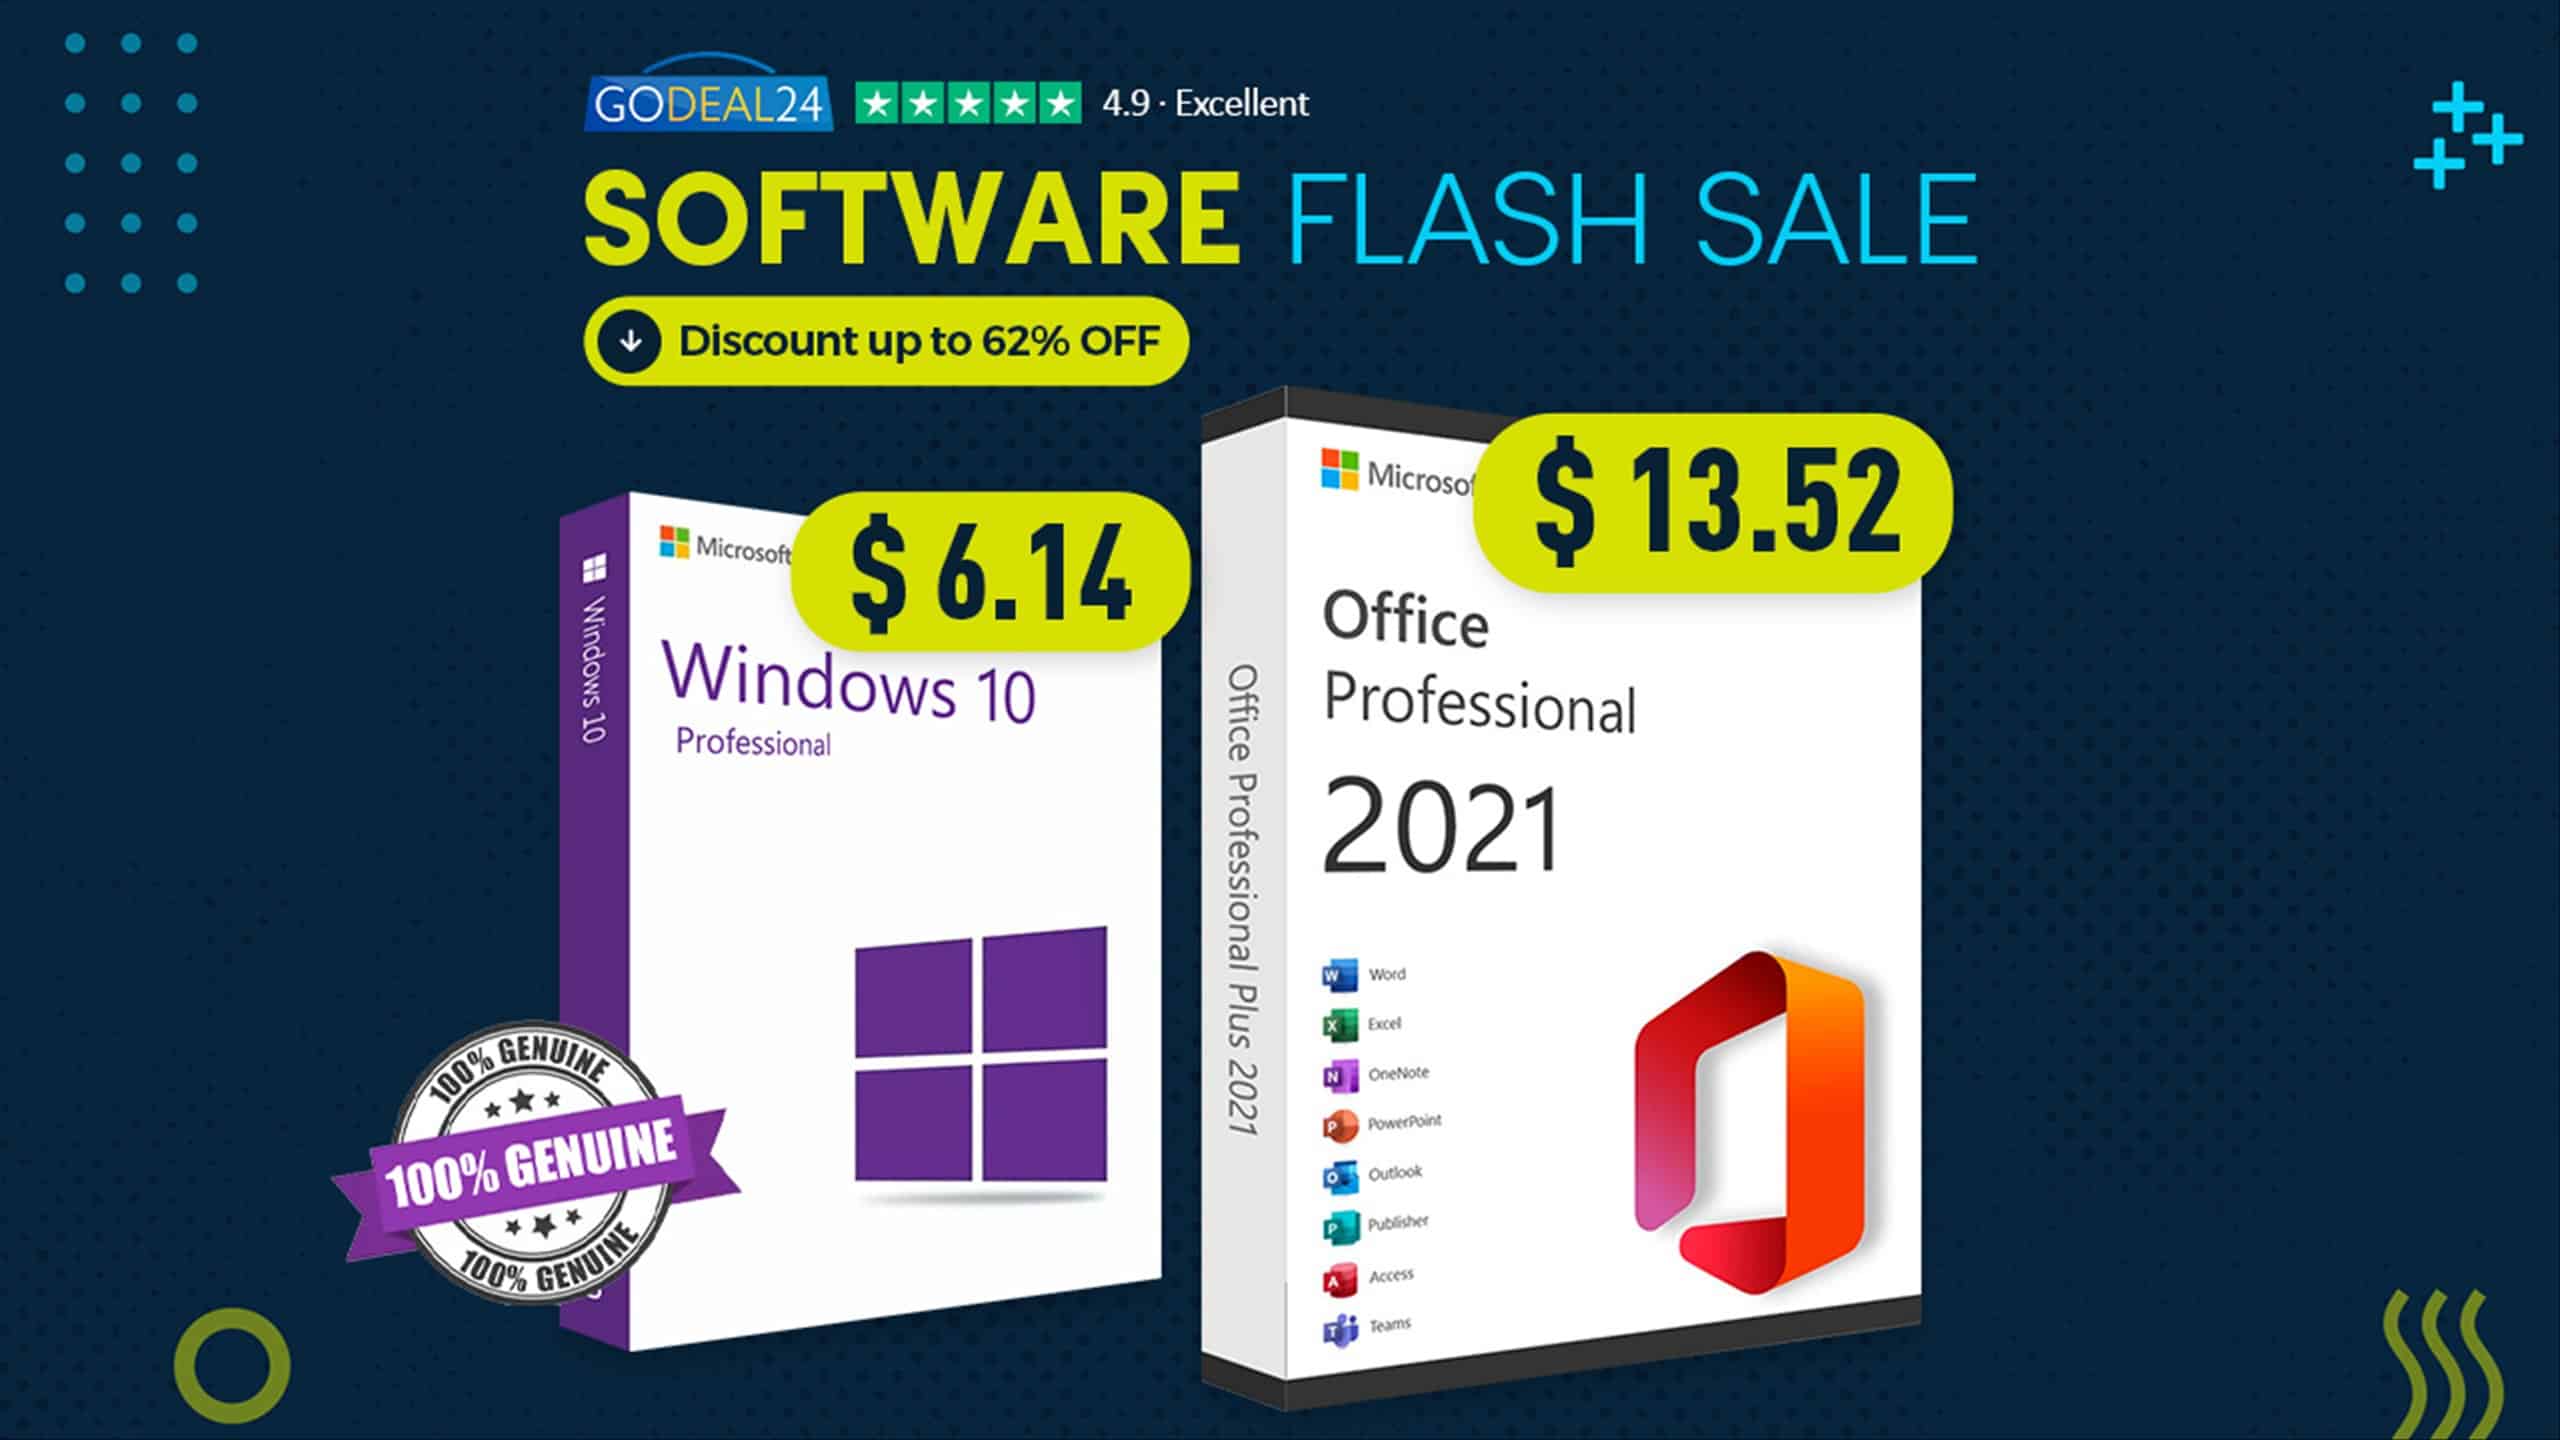 <a></a><a><strong>Genuine Windows 10 Pro Starts from $6.14! Discount up to 62% off at Godeal24’s Software Sale</strong></a>